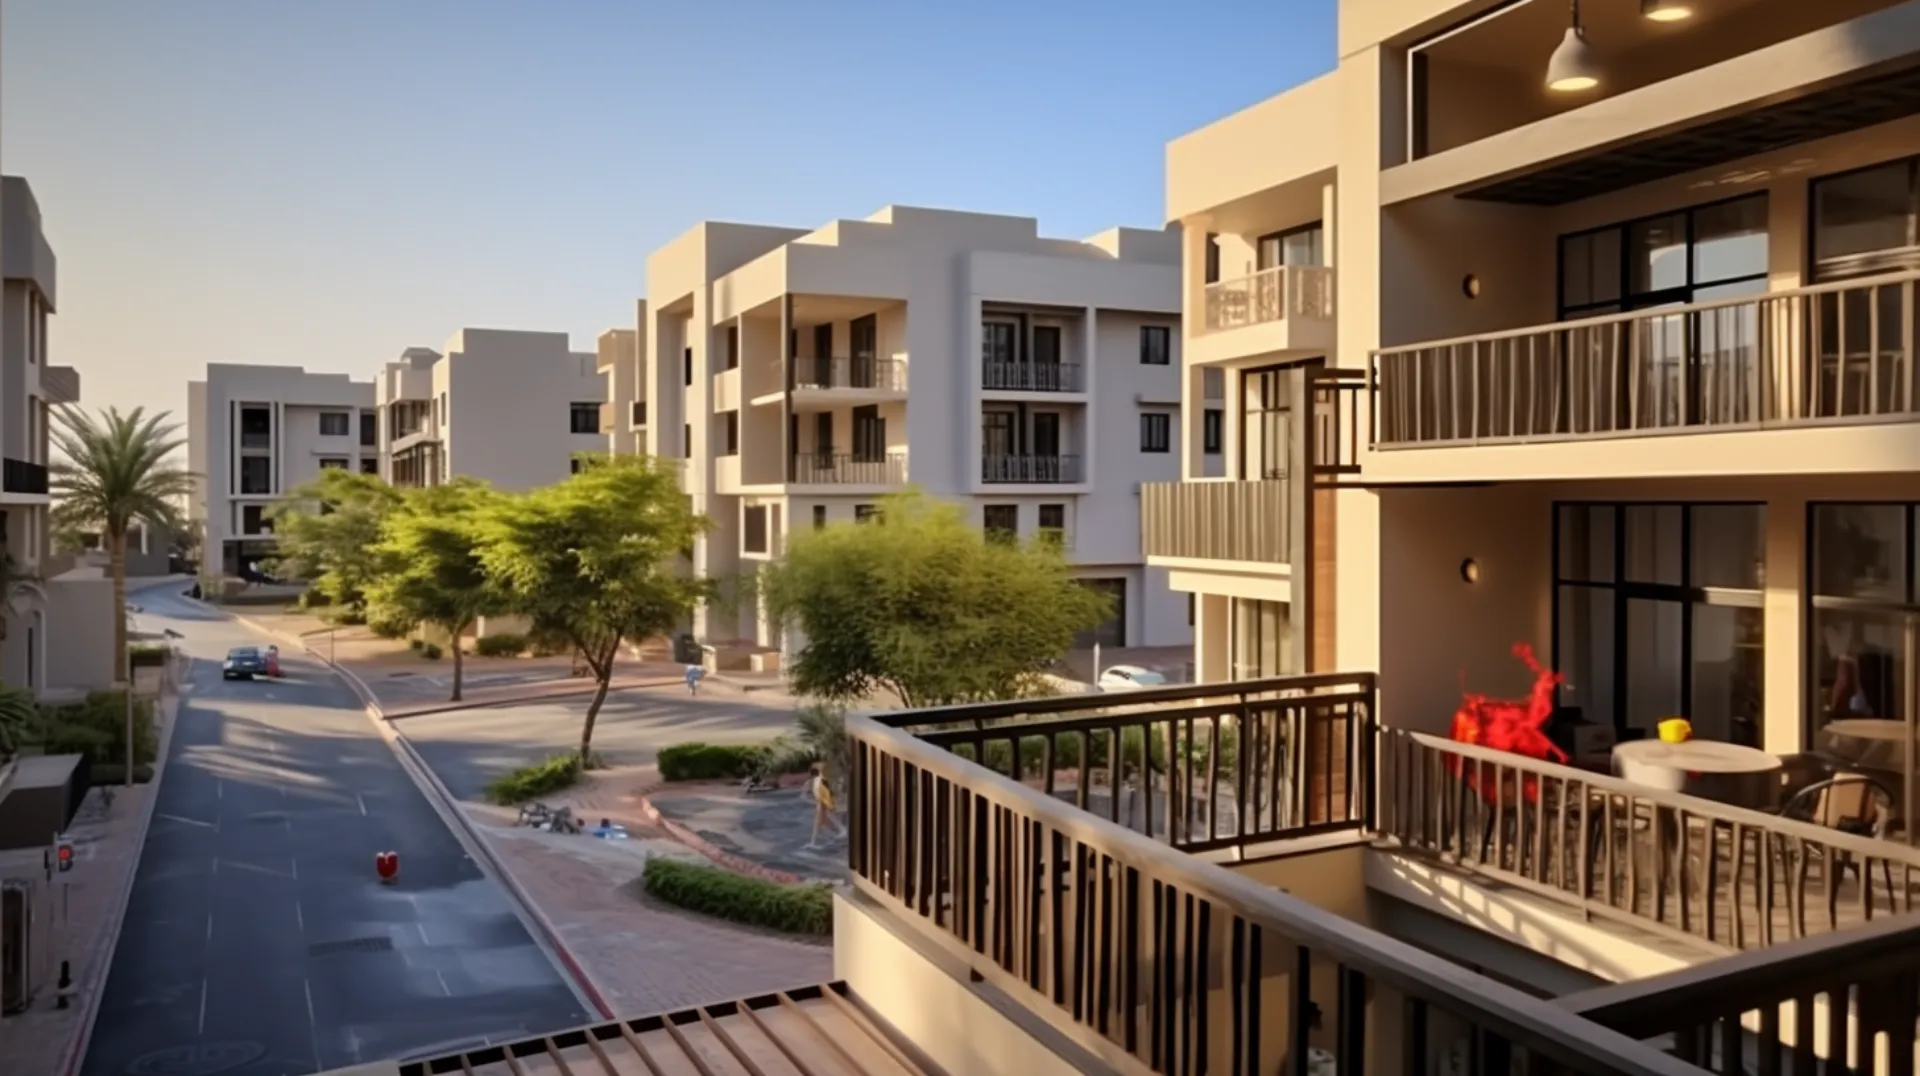 Visual Overview of Affordable Housing in Al Quoz: Explore this image to discover the diverse and economical housing opportunities available in Al Quoz, blending convenience with cost-effectiveness